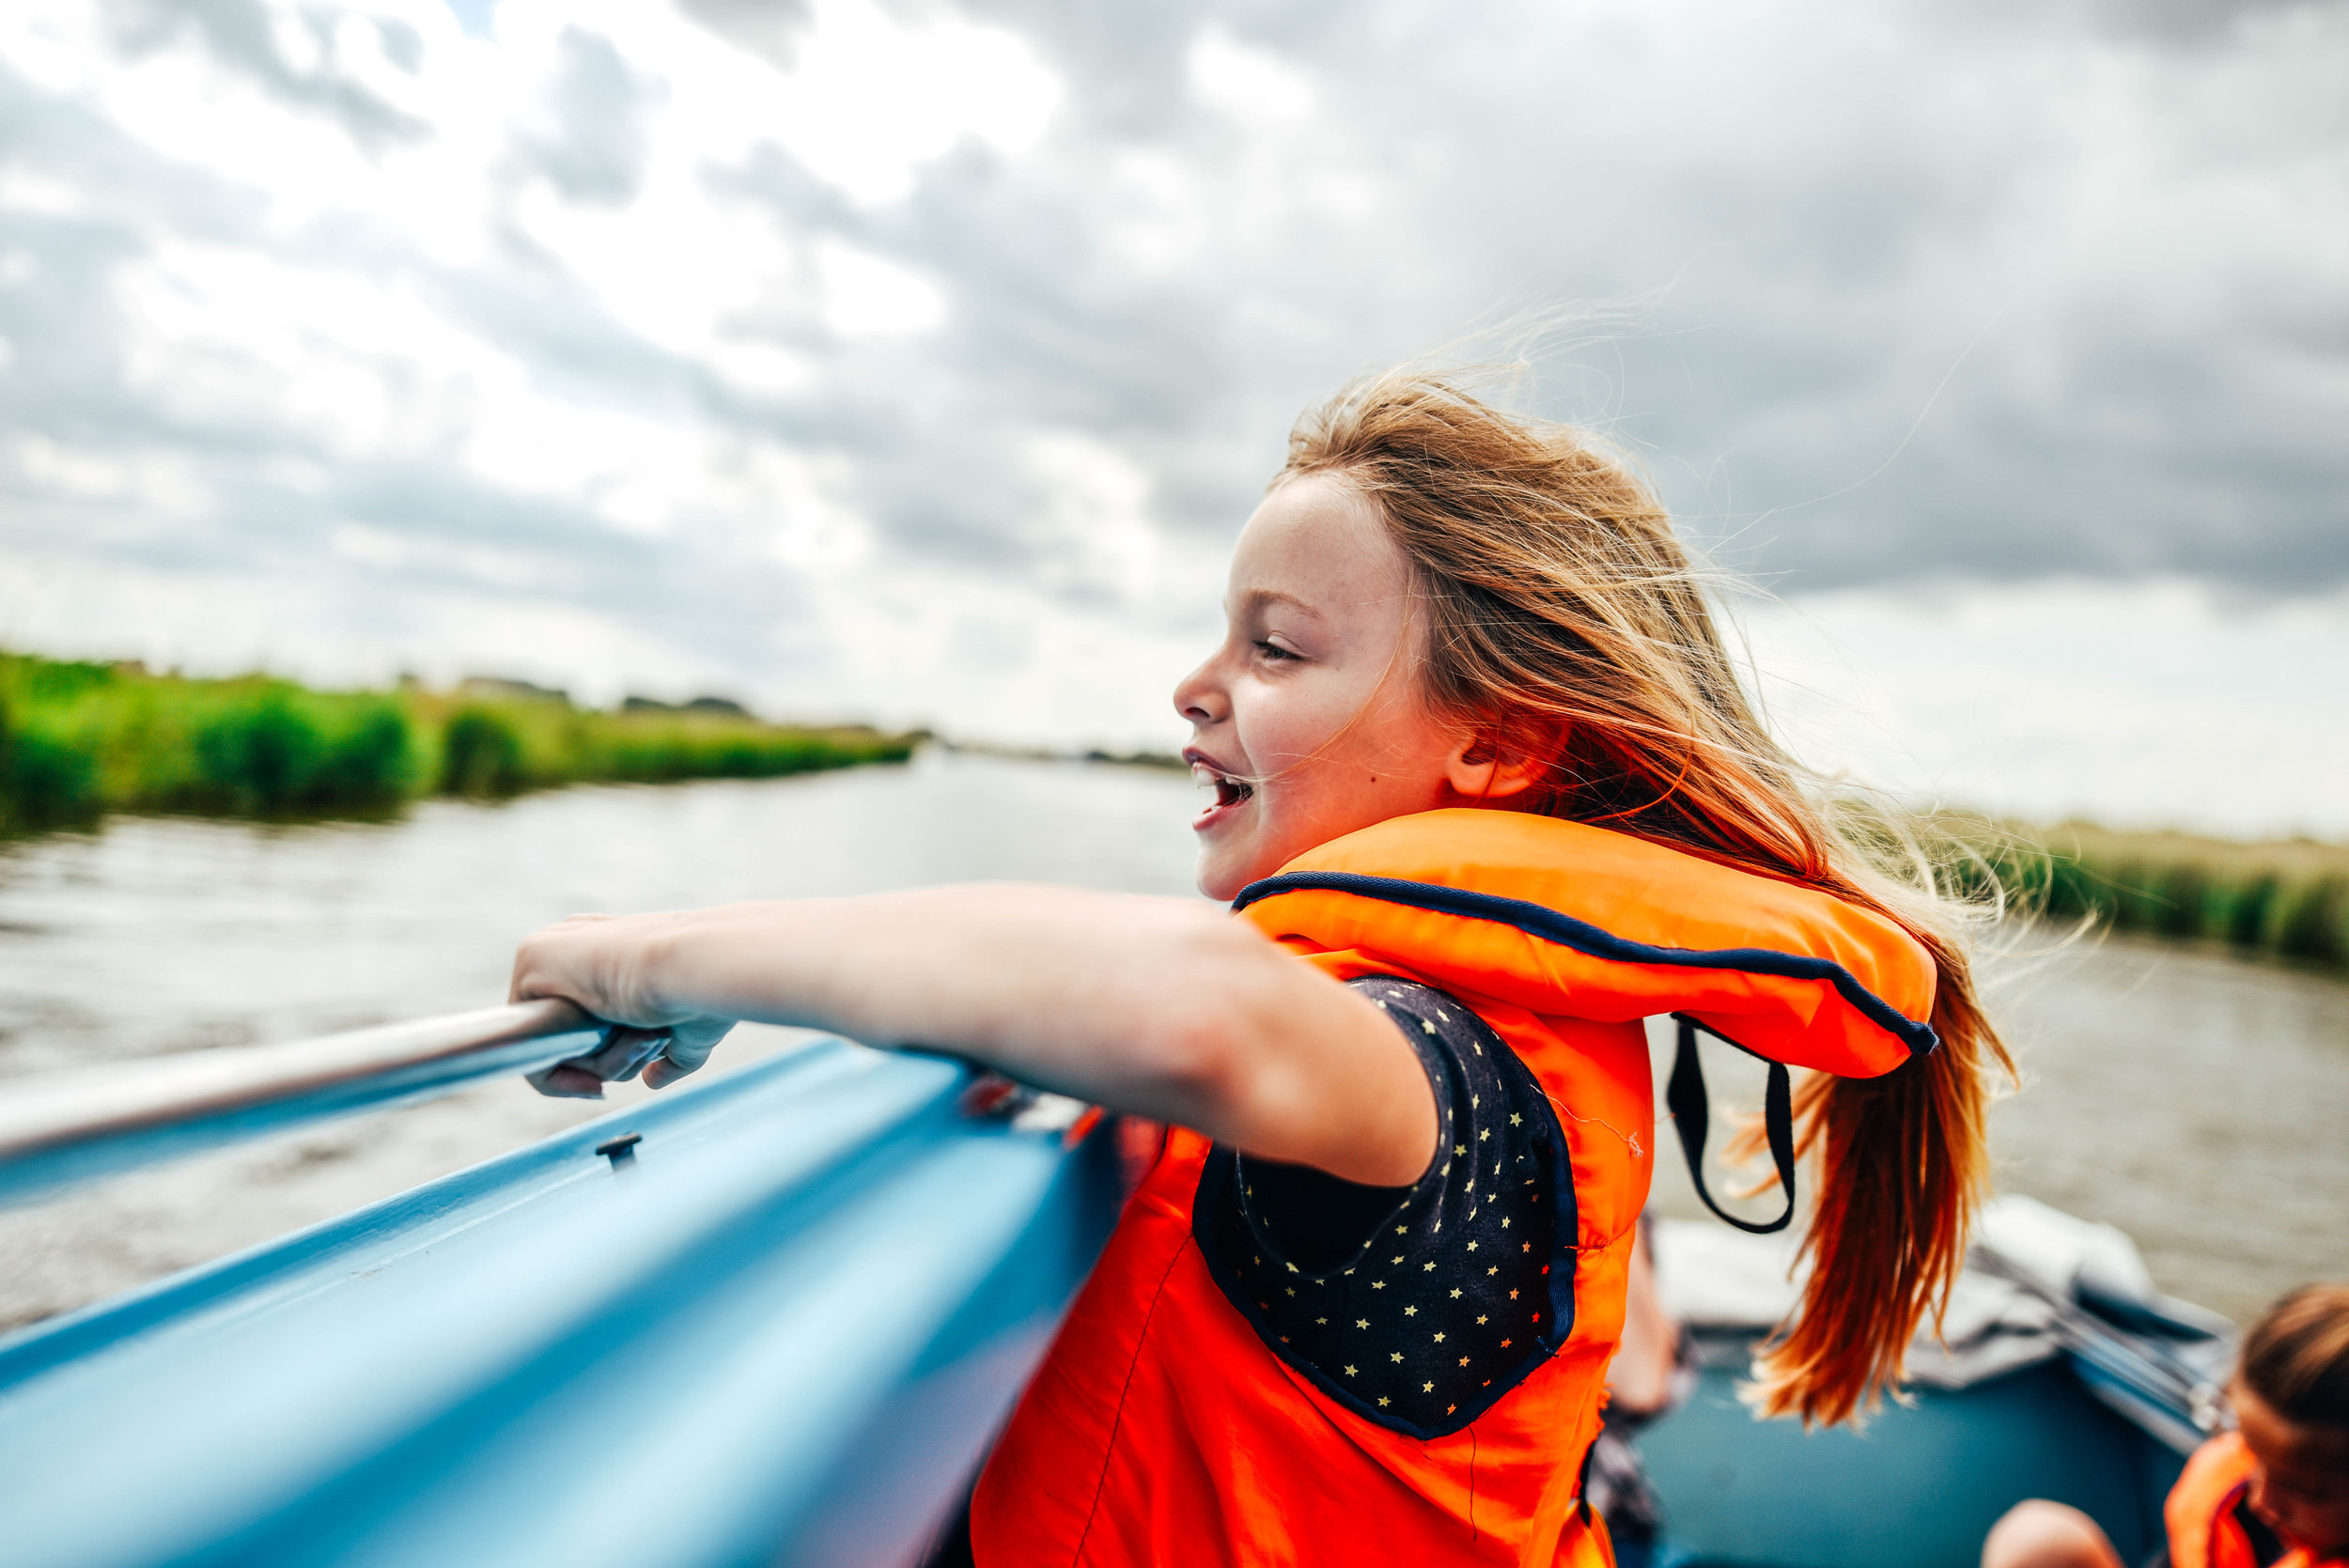 Little girl in life jacket on river boat Essex UK Documentary Lifestyle Portrait Photographer